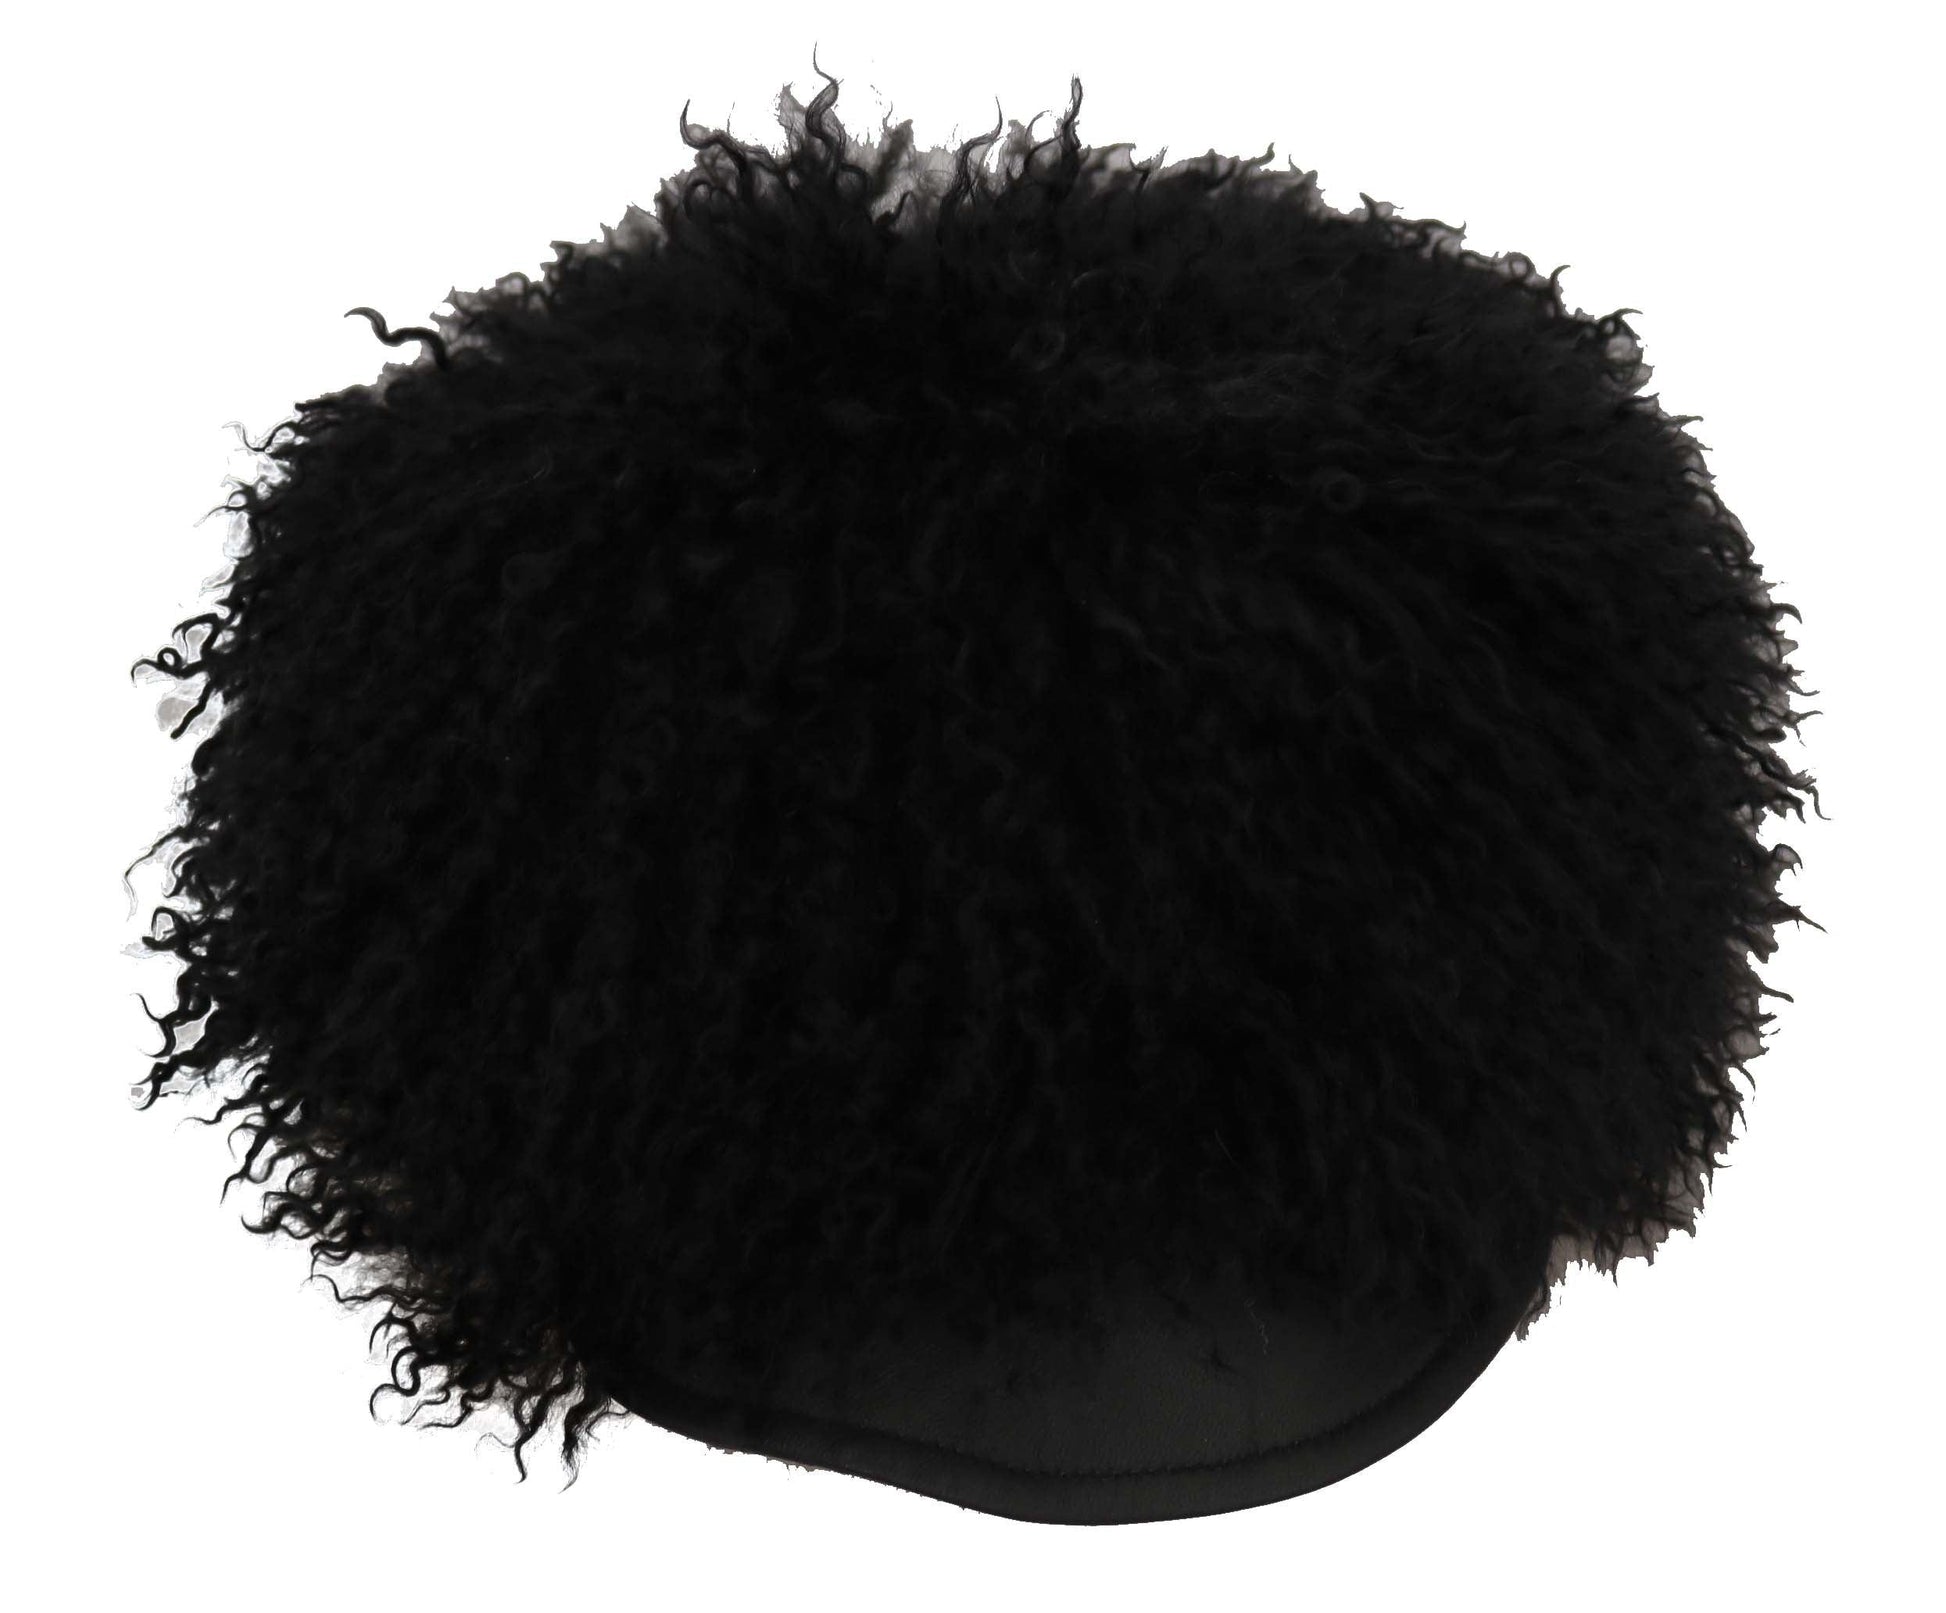 Black Tibet Lamb Fur Leather Gatsby Hat - Designed by Dolce & Gabbana Available to Buy at a Discounted Price on Moon Behind The Hill Online Designer Discount Store